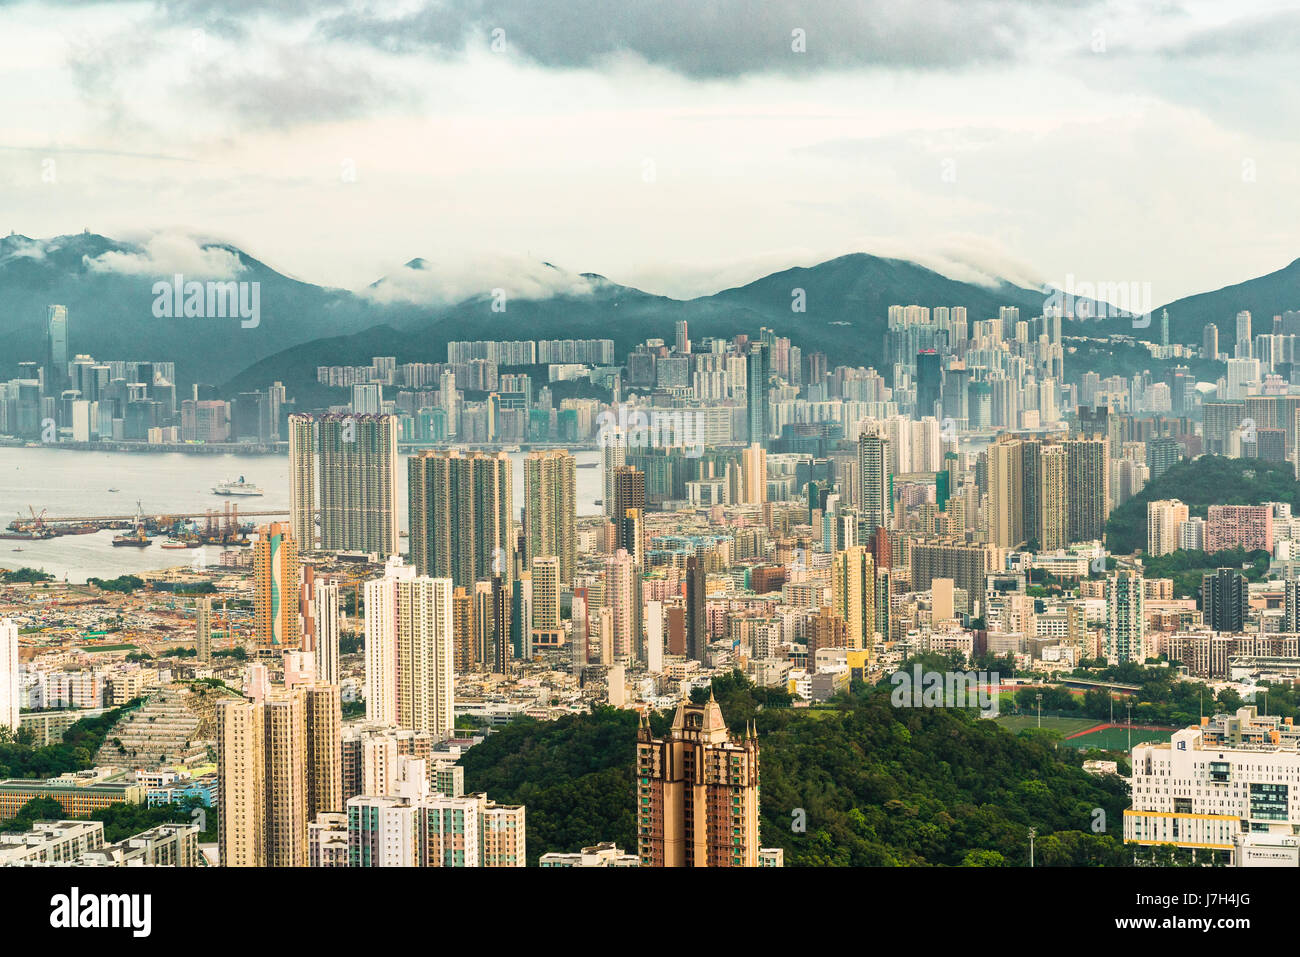 The Kowloon skyline taken in the evening from Lion Rock Peak Stock Photo